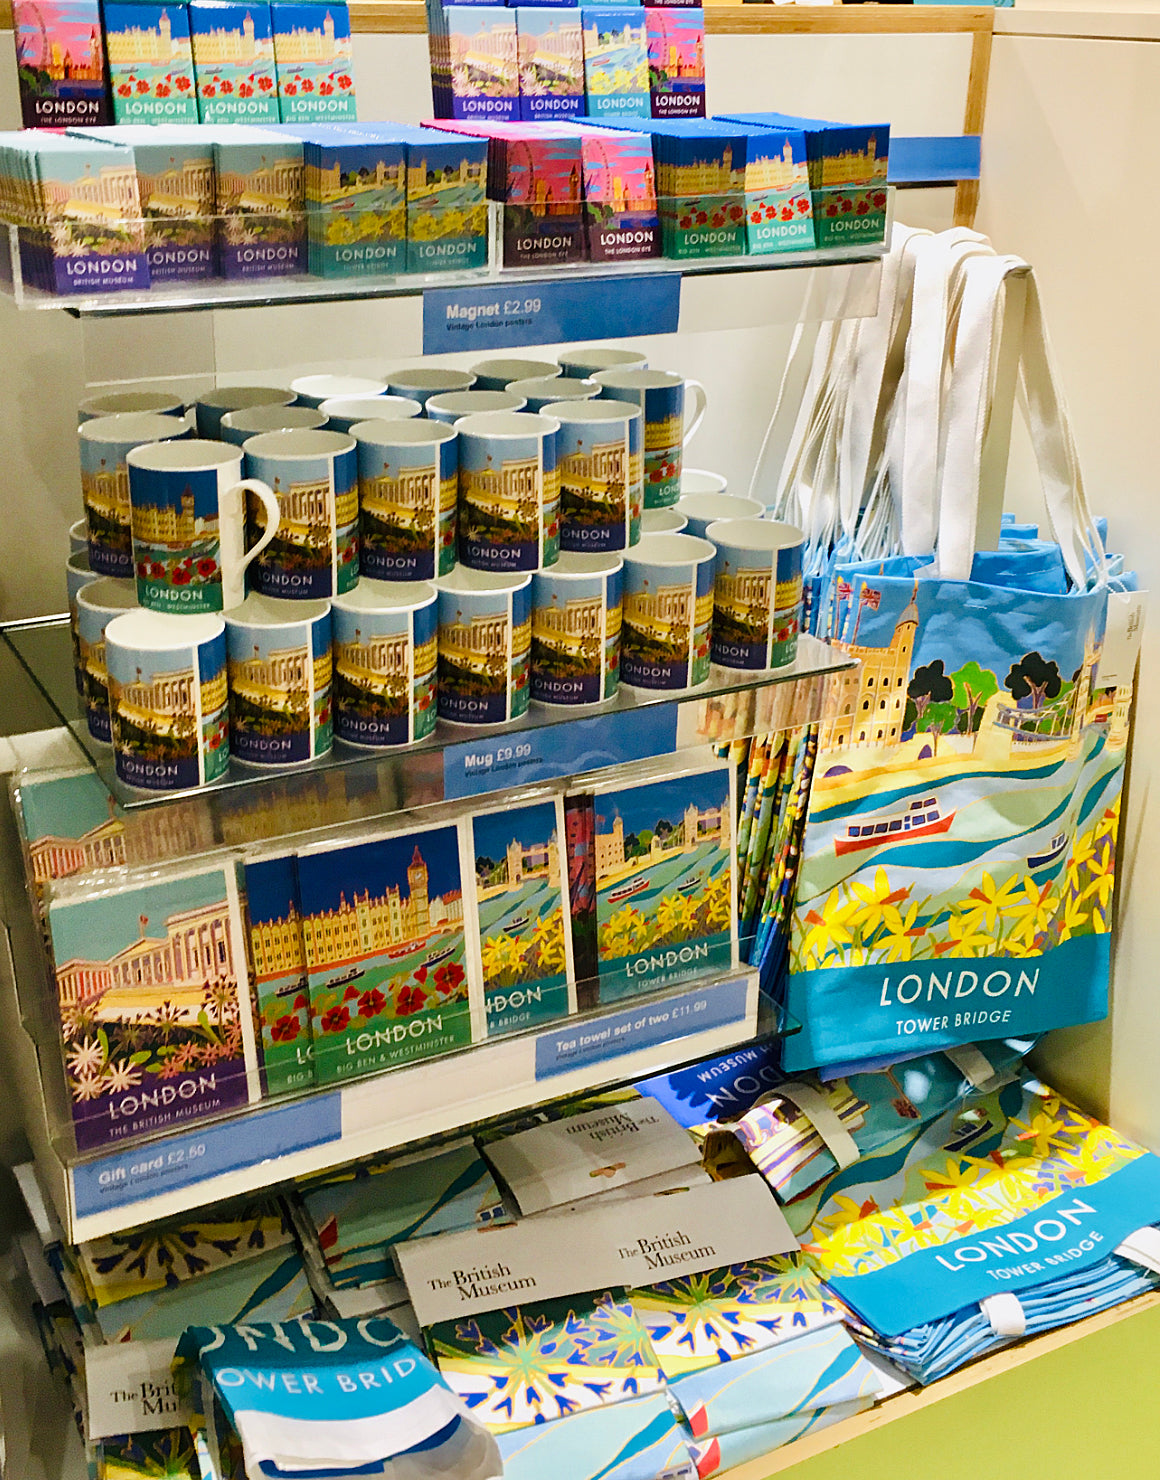 Artist Joanne Short's artwork and gift items on display in the British Museum Shop in London